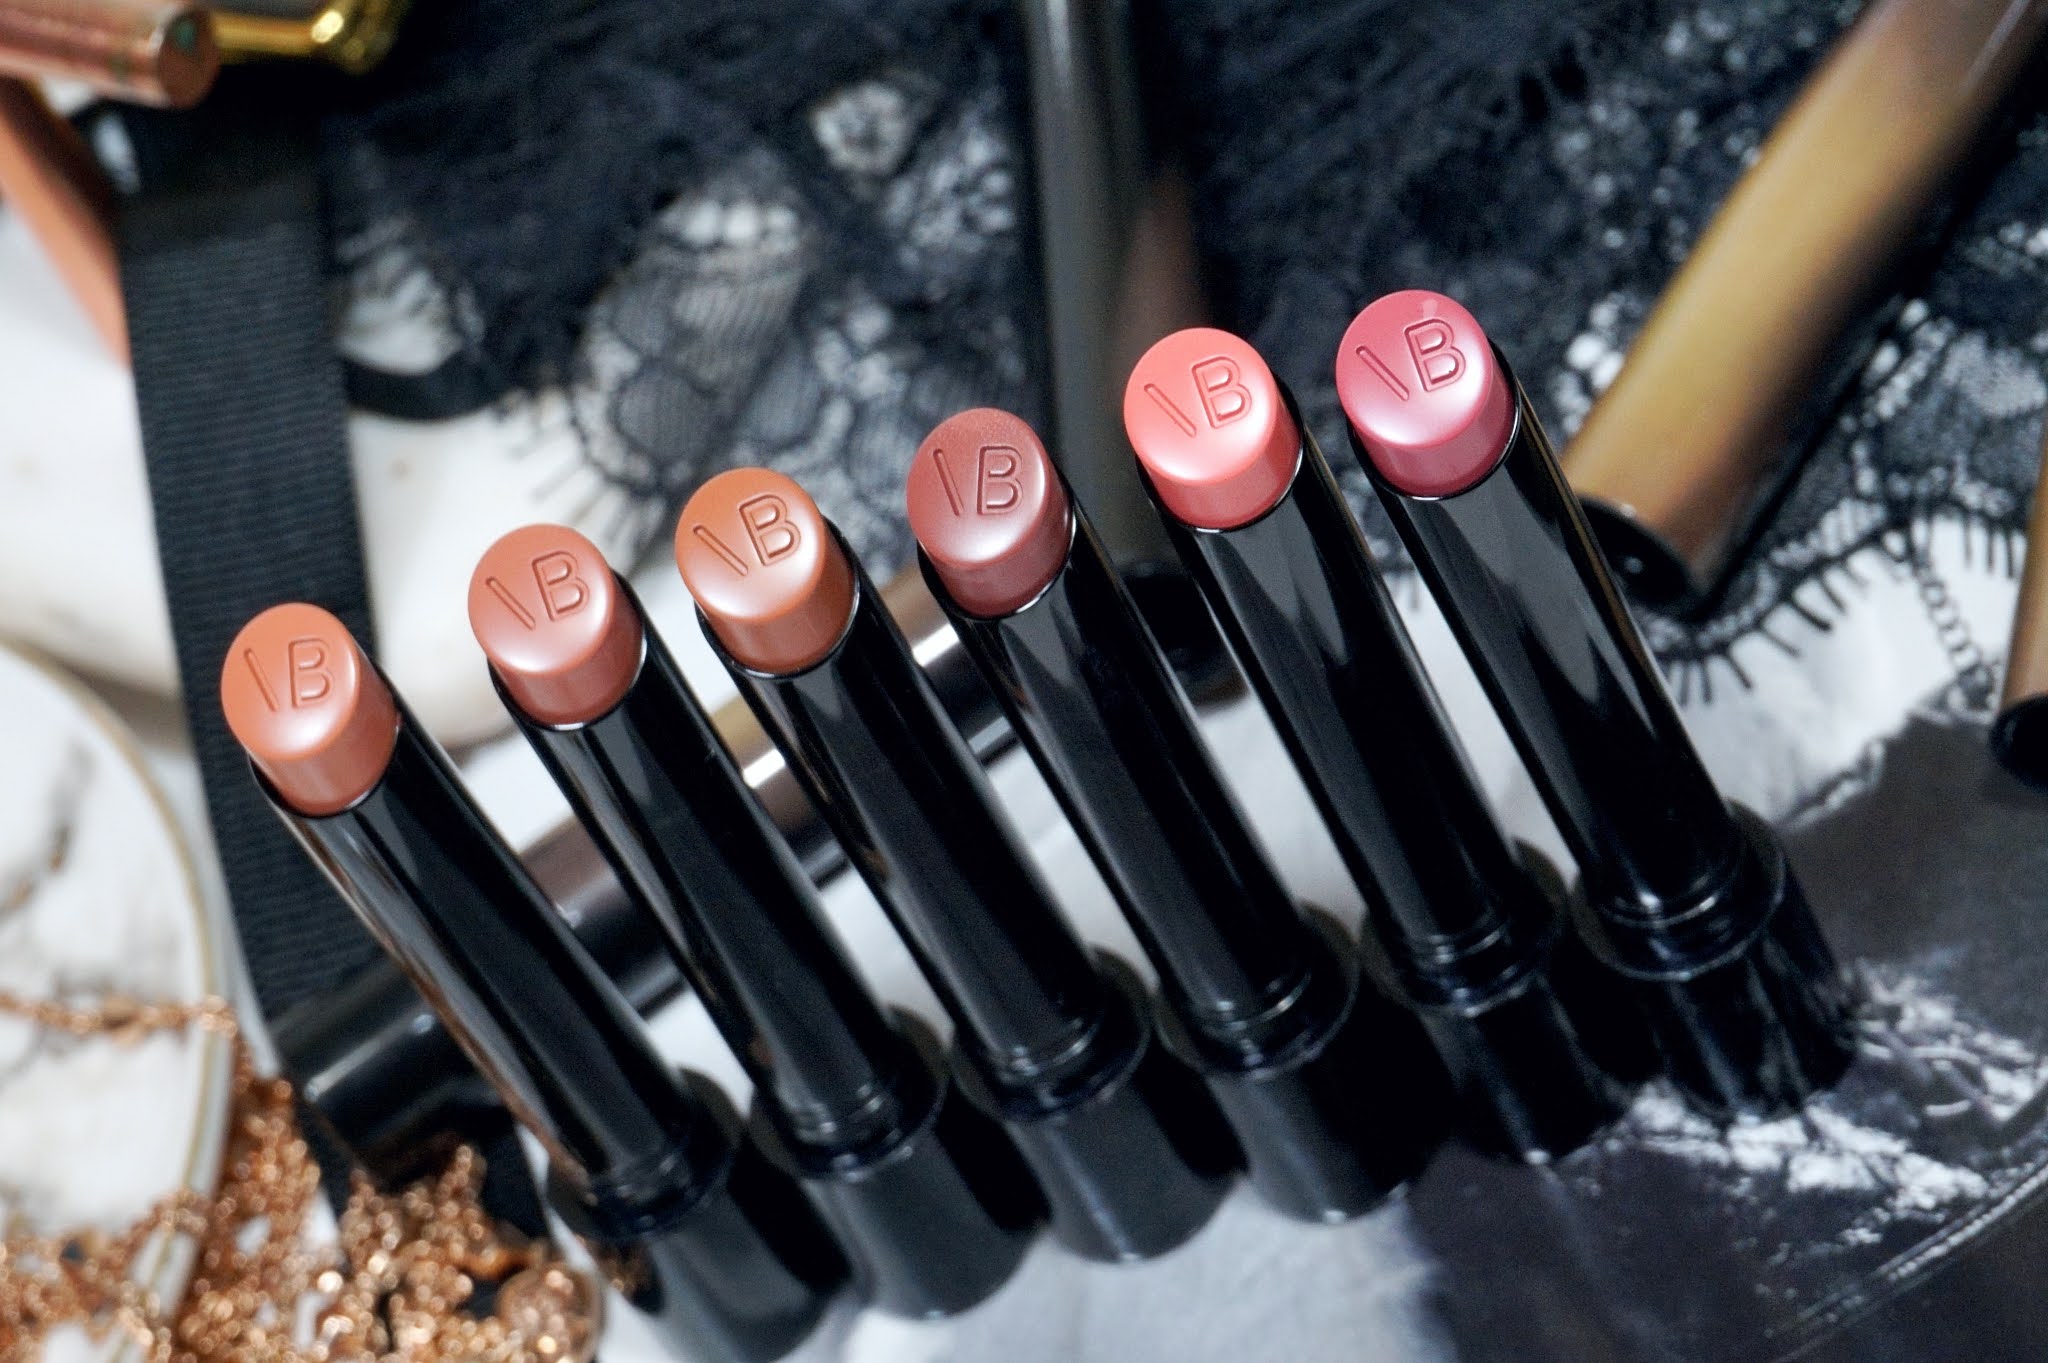 Victoria Beckham Beauty Posh Lipstick Review and Swatches